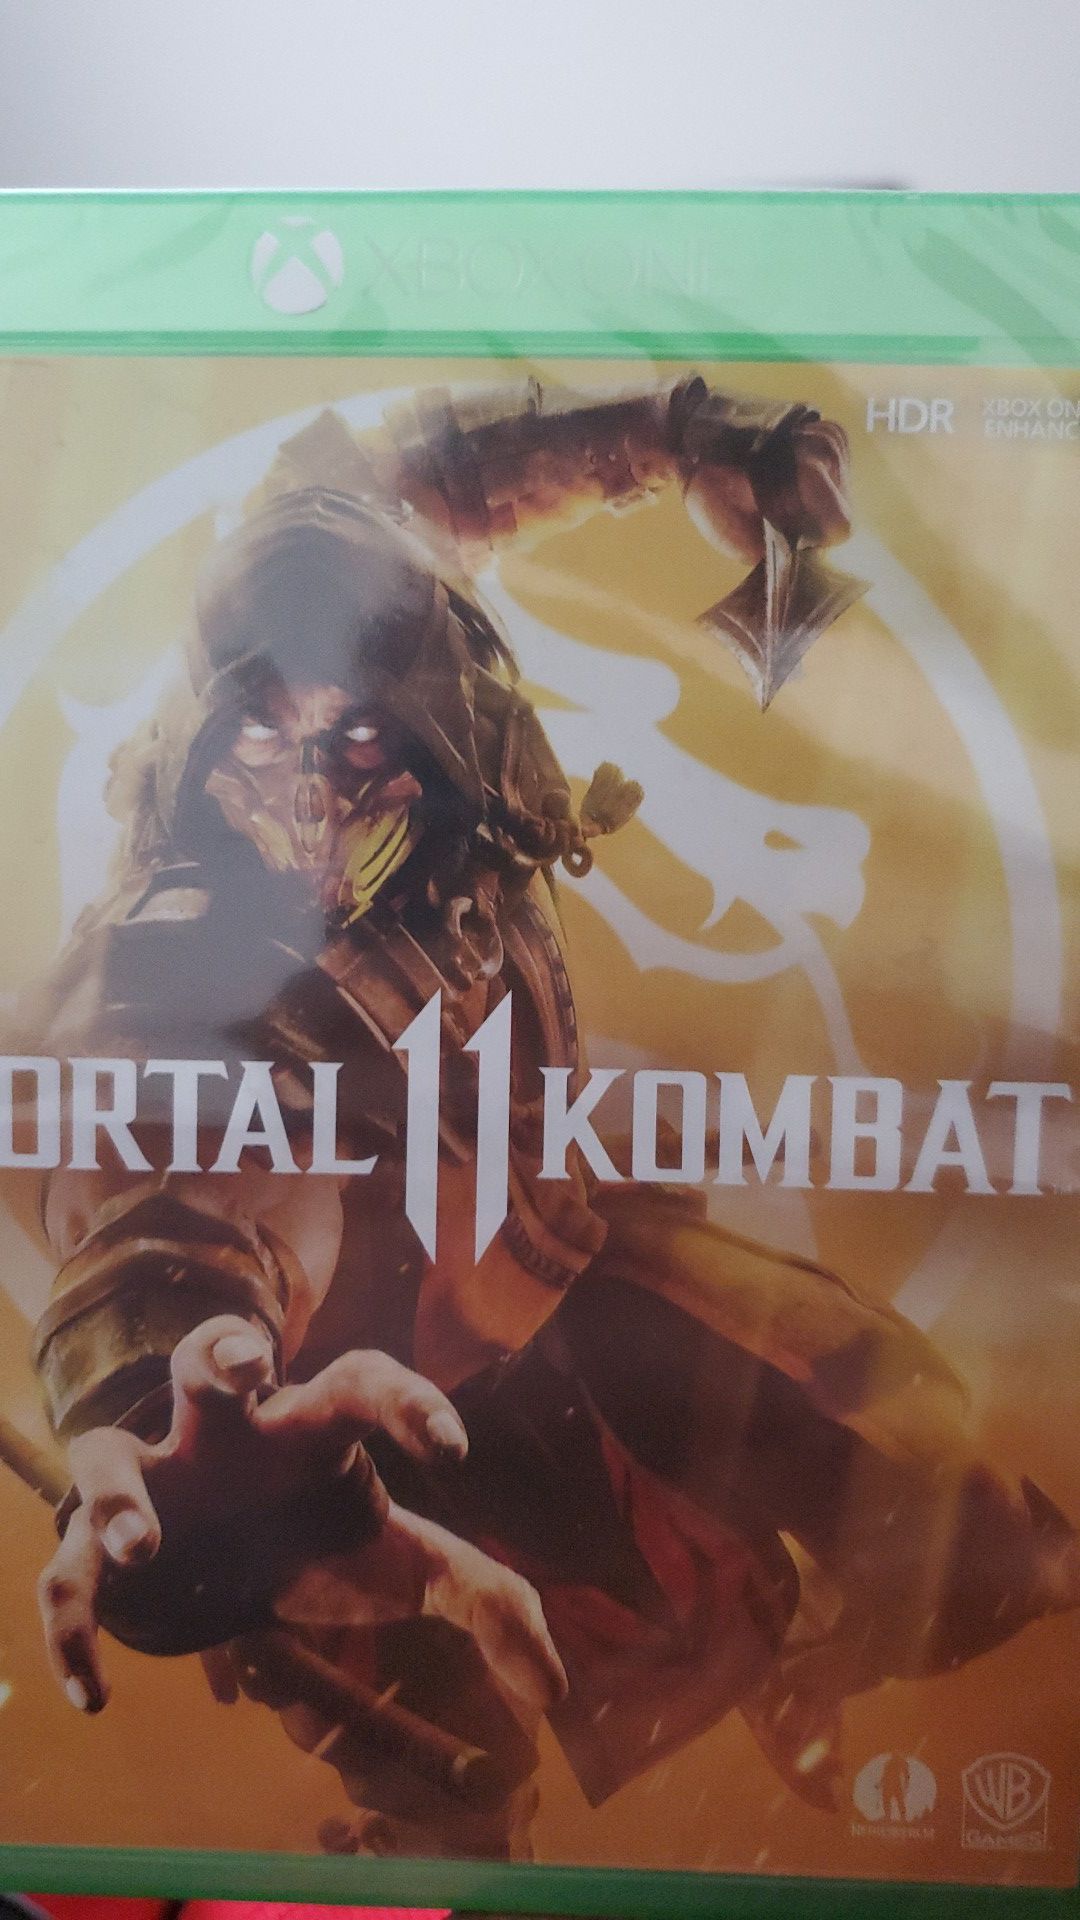 Brand new never been open MK11 for xbox1